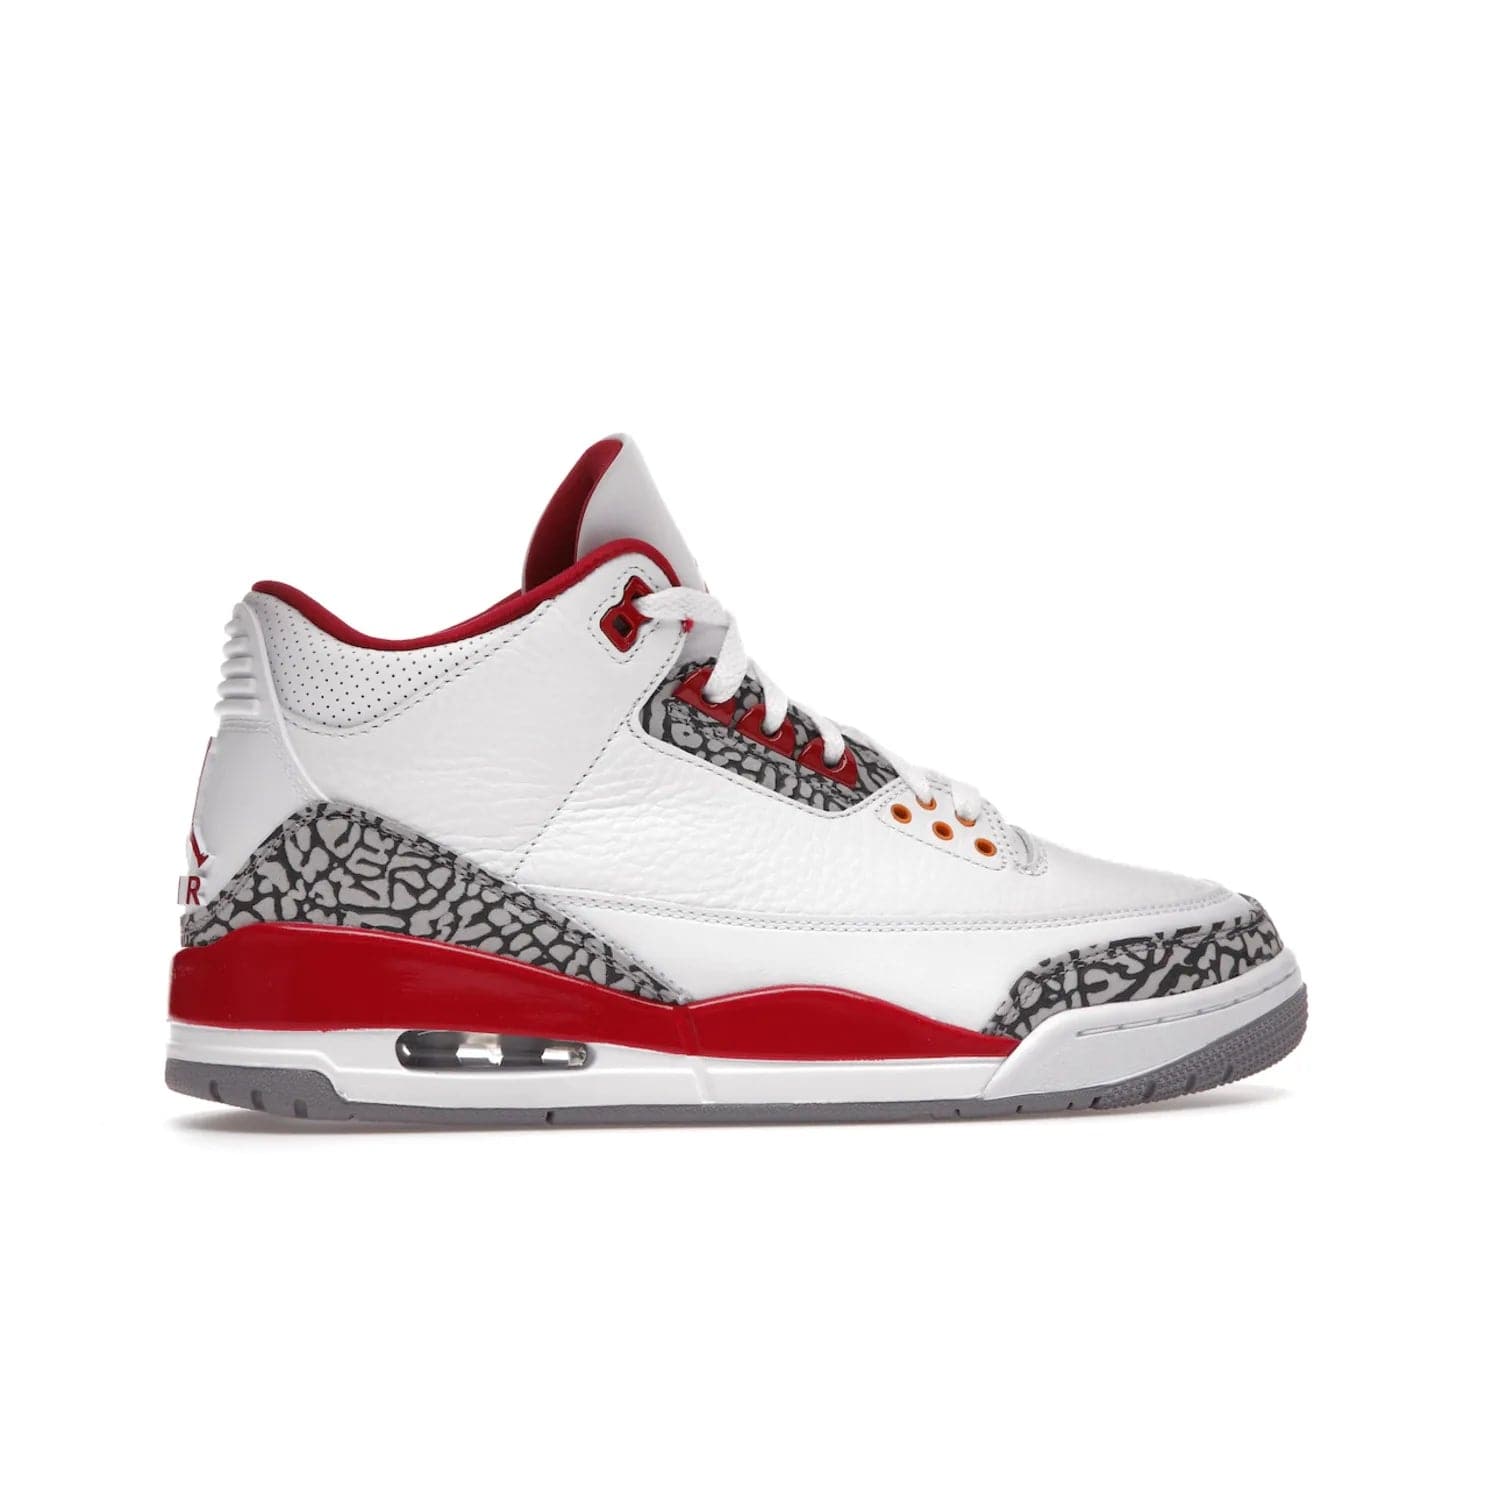 Jordan 3 Retro Cardinal Red - Image 36 - Only at www.BallersClubKickz.com - Air Jordan 3 Retro Cardinal Red combines classic style and modern appeal - white tumbled leather, signature Elephant Print overlays, cardinal red midsoles, Jumpman logo embroidery. Available Feb 2022.